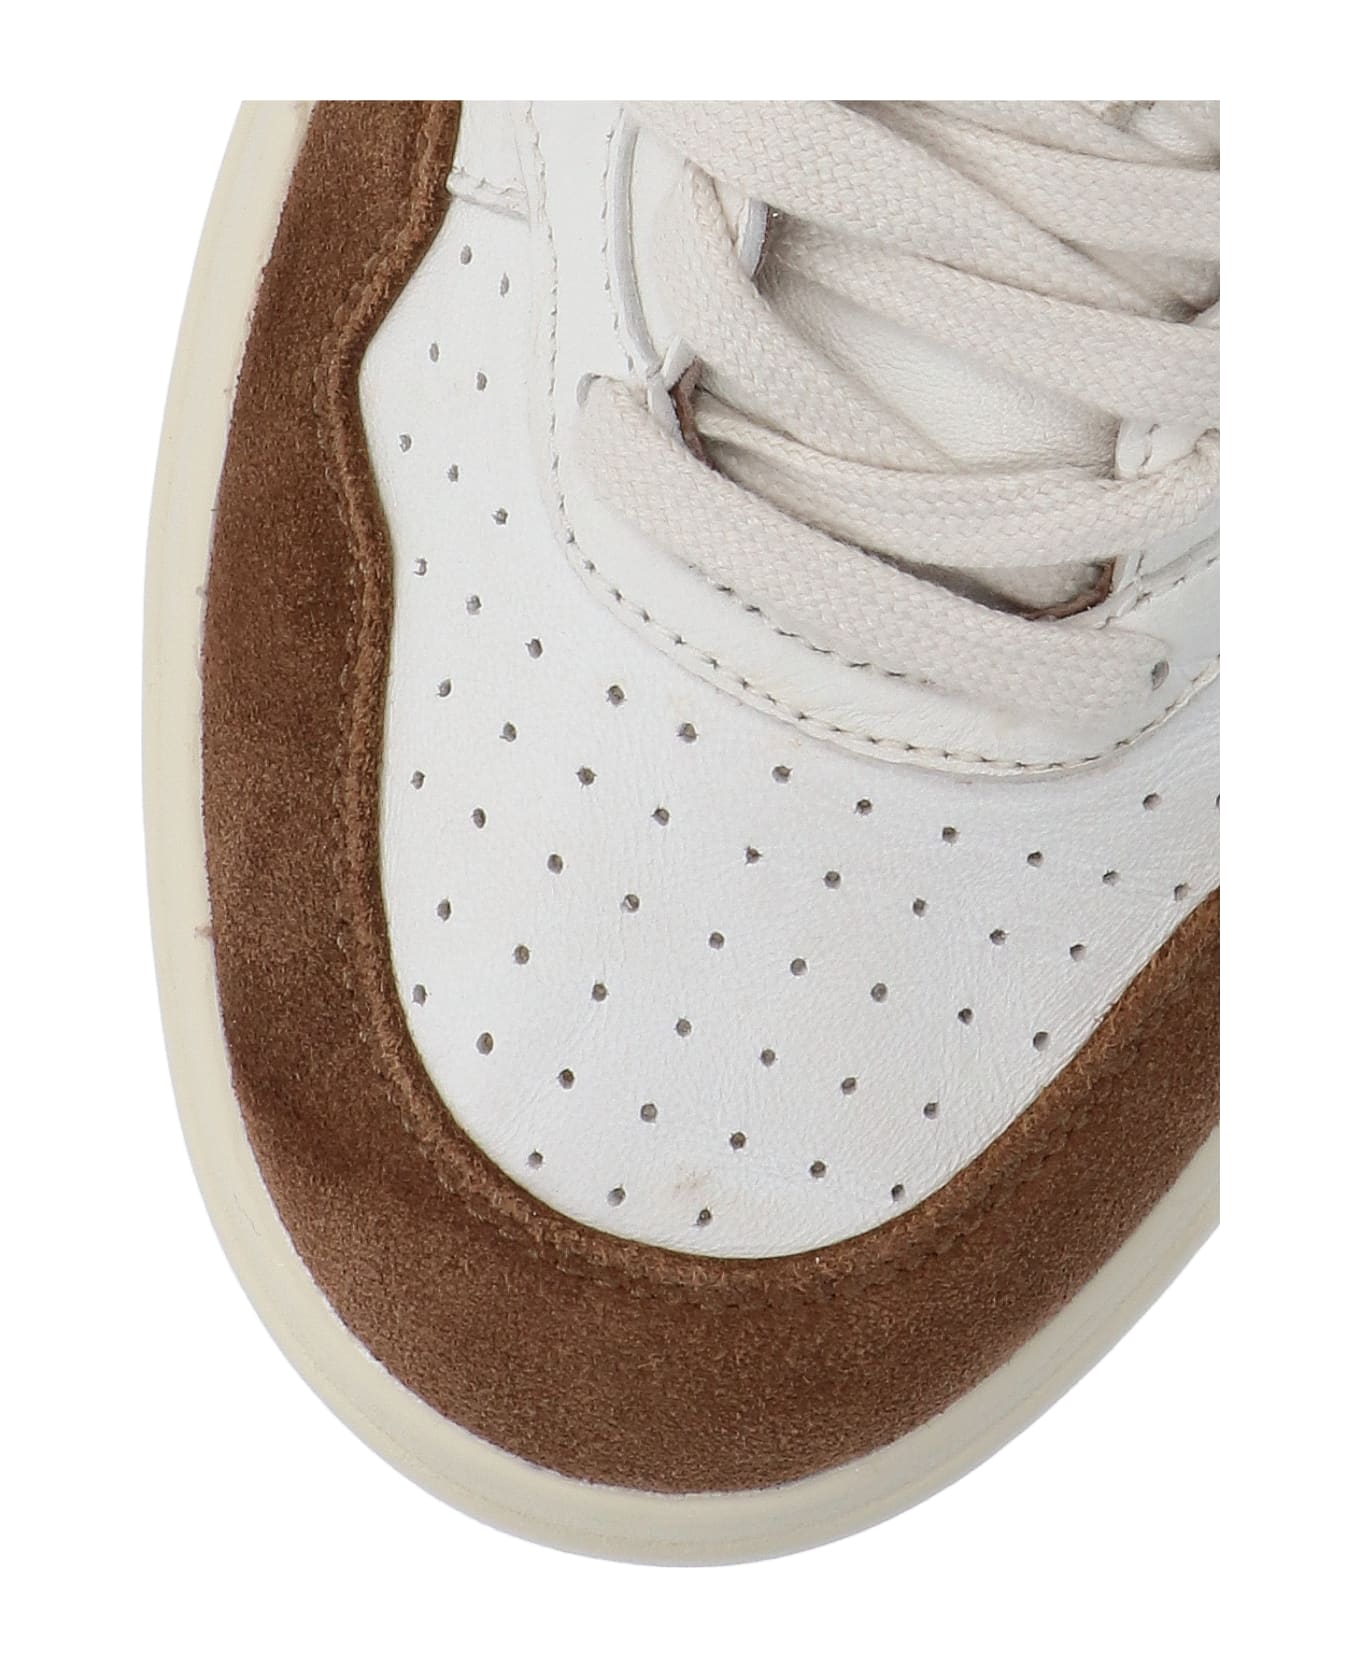 Autry Medalist Low Sneakers In Brown Suede And White Leather - White スニーカー